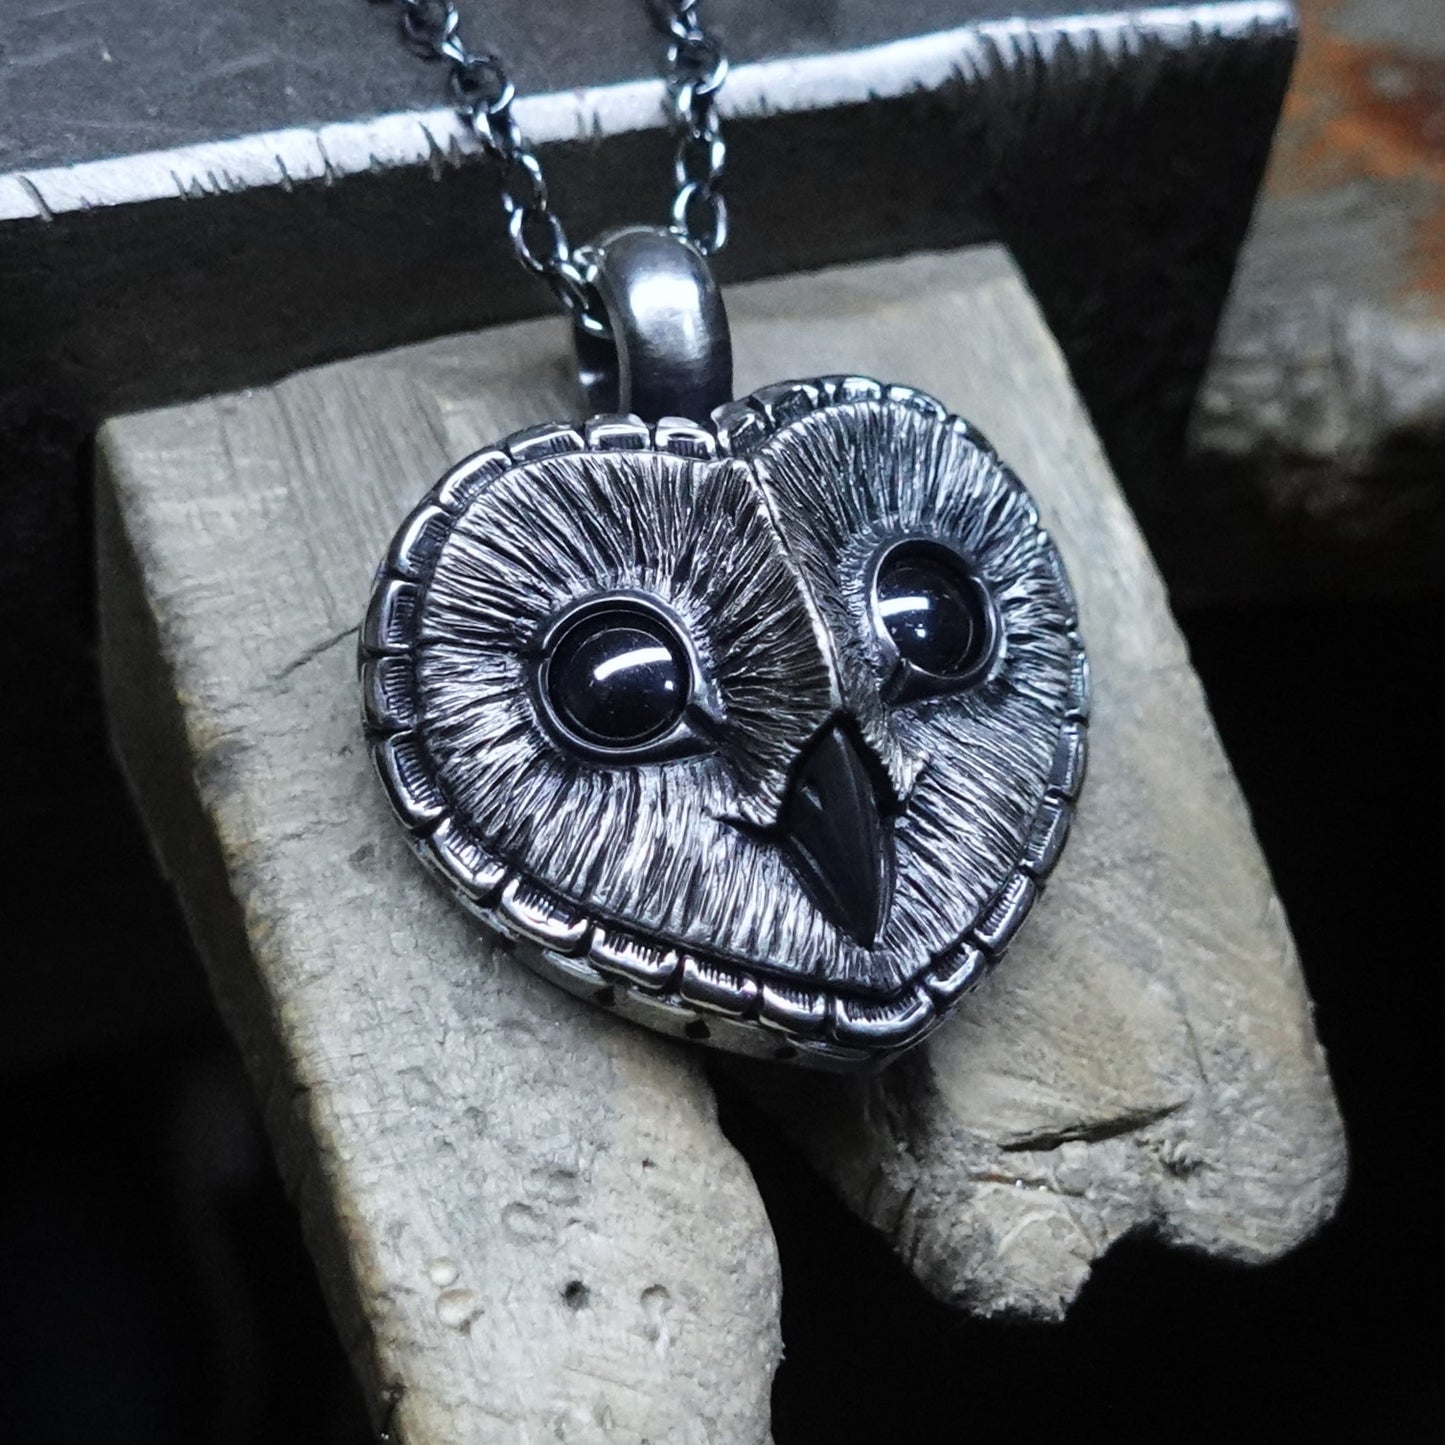 Black eyed Barn Owl necklace, large sterling silver Barn Owl pendant with black gemstone eyes and a silver chain.  *This piece is finished and ready to be shipped* © Adrian Ashley